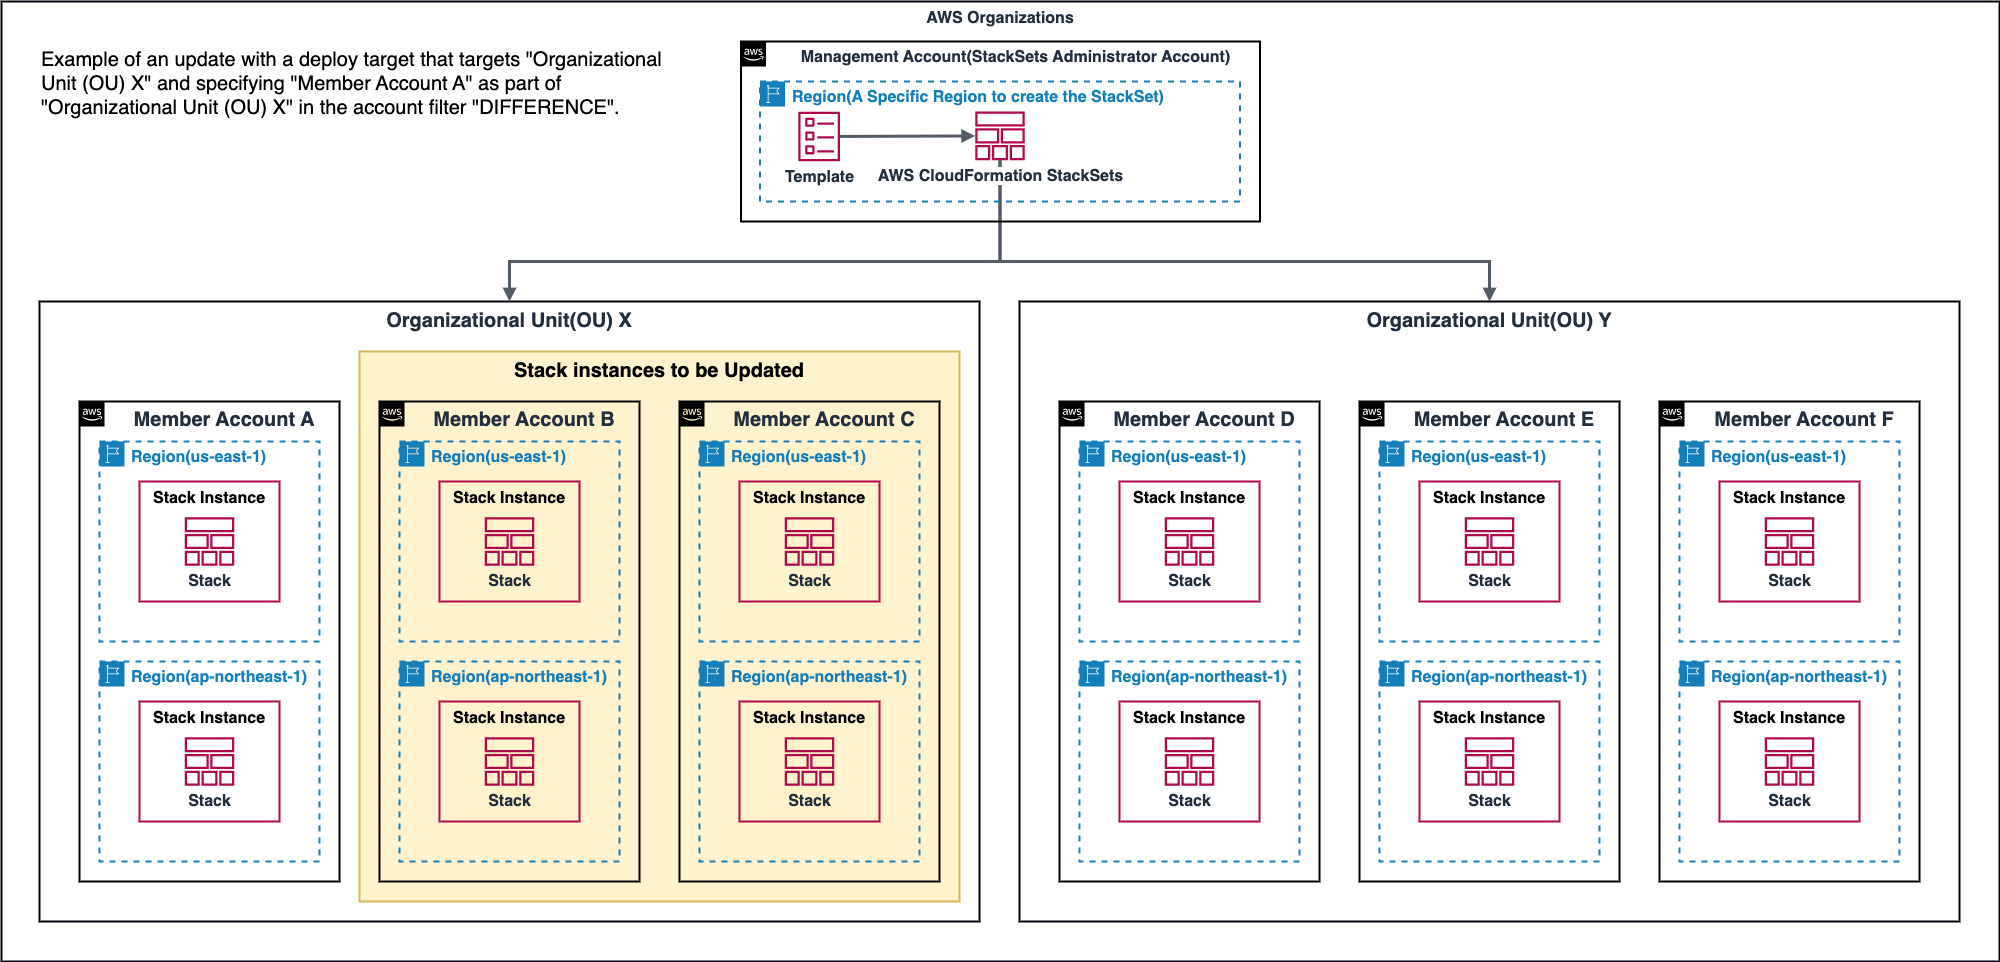 Example of Deployment Target Using DIFFERENCE